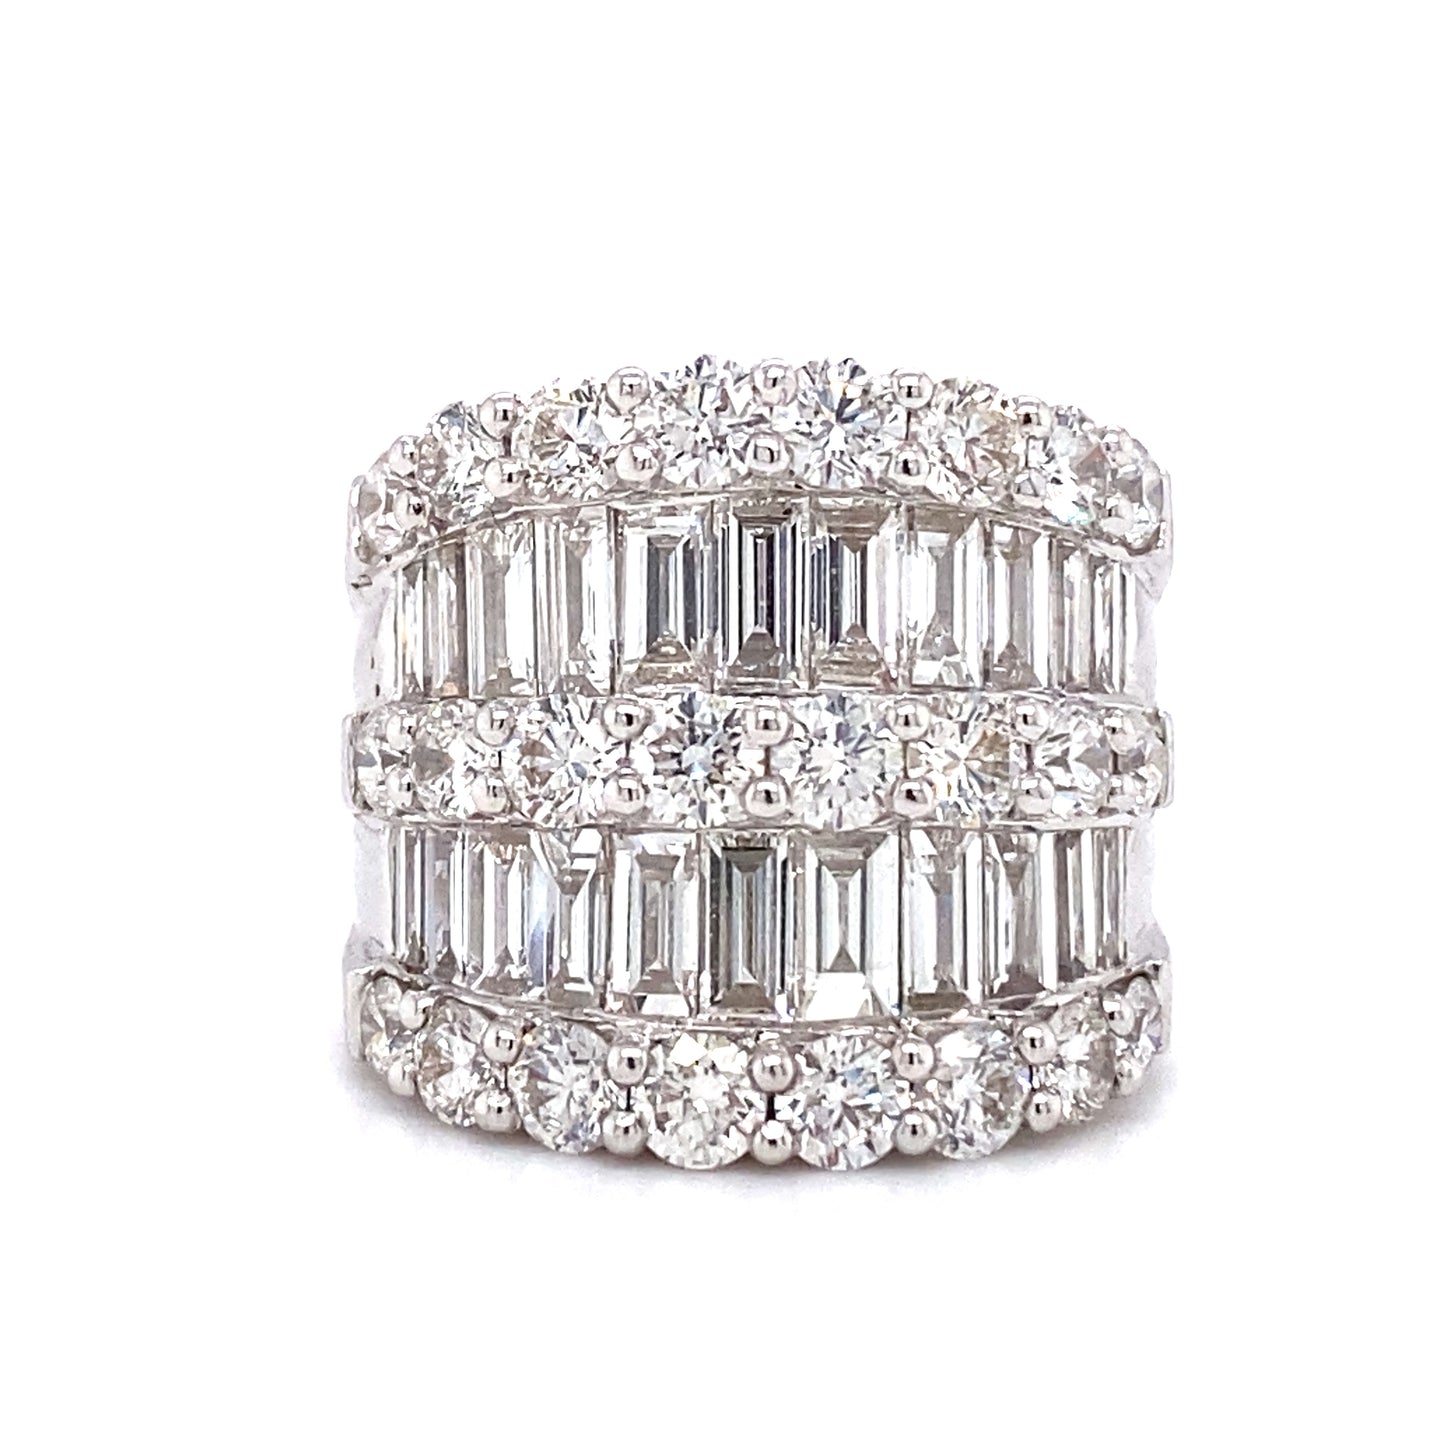 Circa 1980s 4.8 Carat Round and Baguette Diamond Band in 18K White Gold